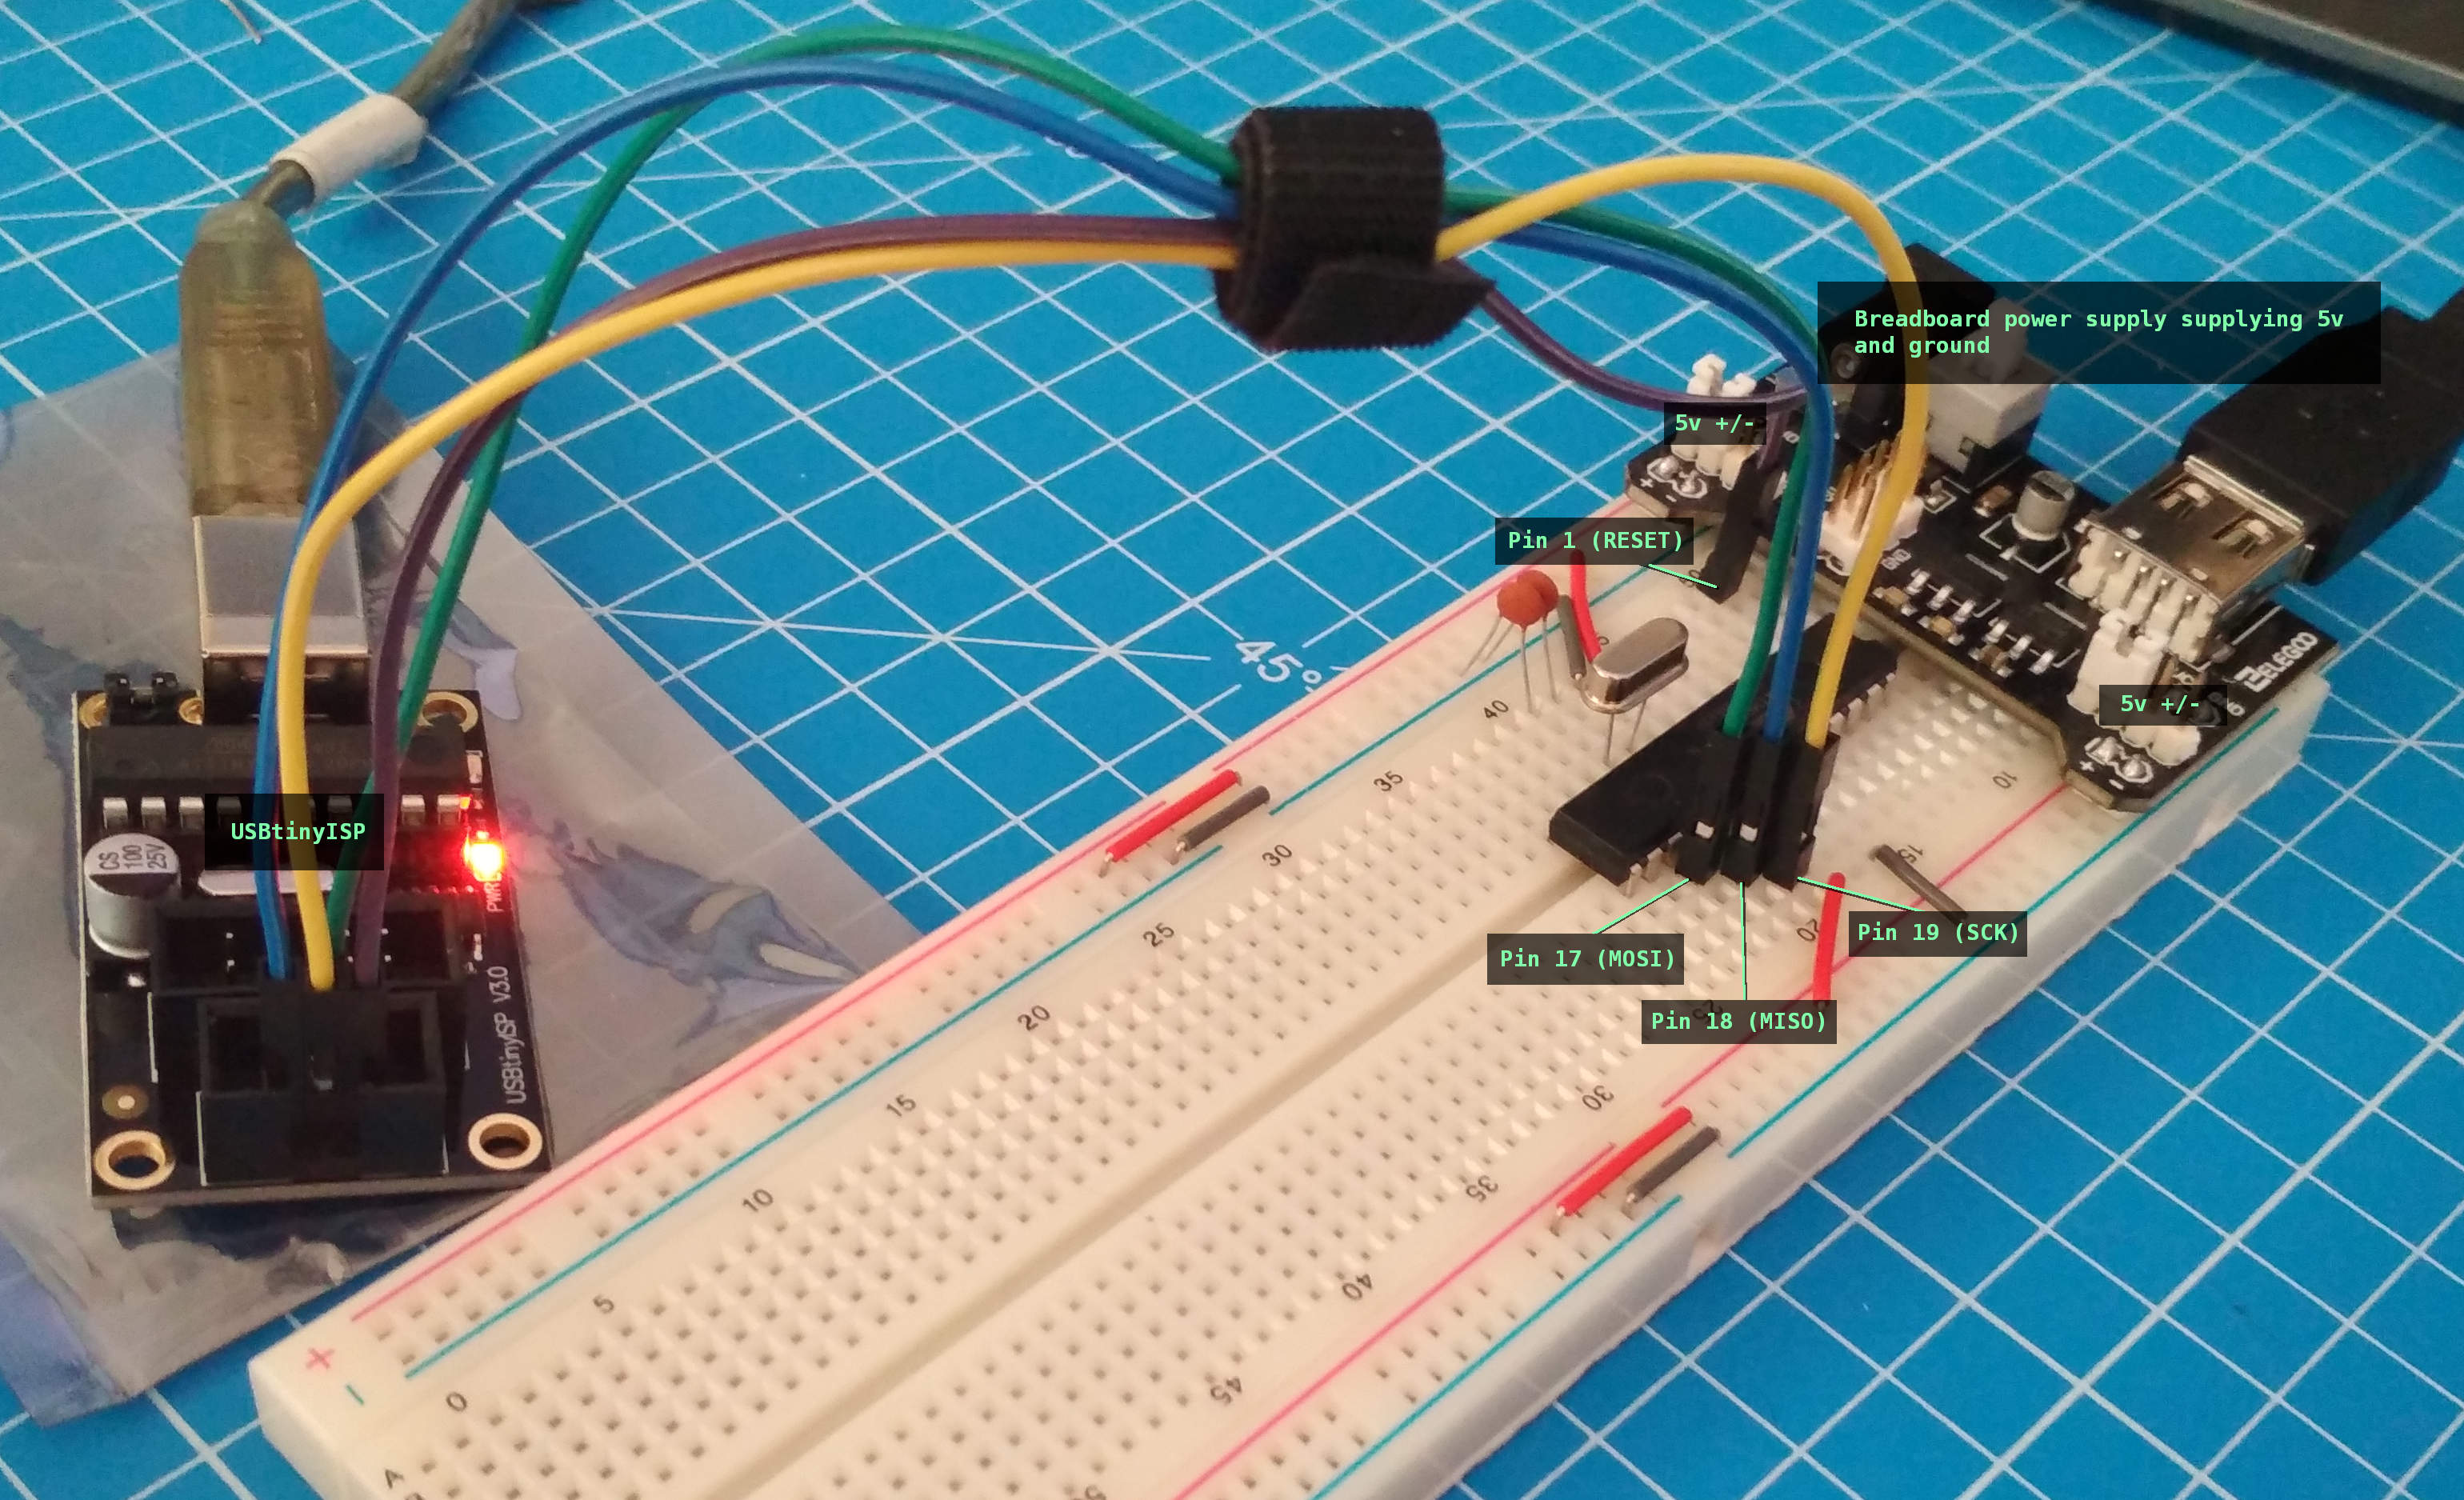 Breadboard Power And ISP (1)
        